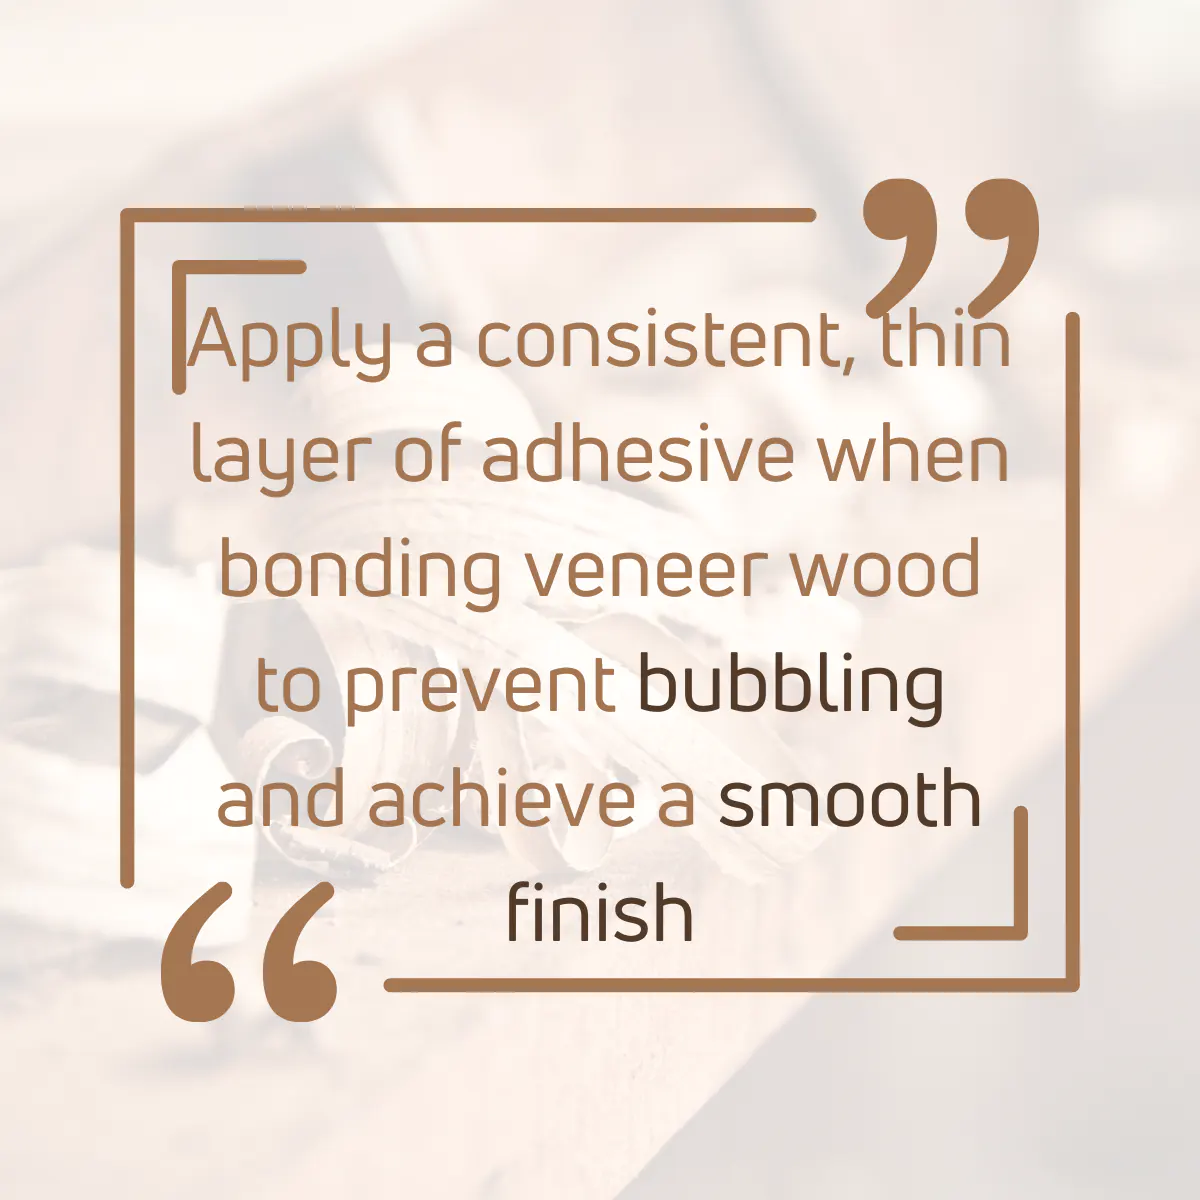 Tip for working with Veneer